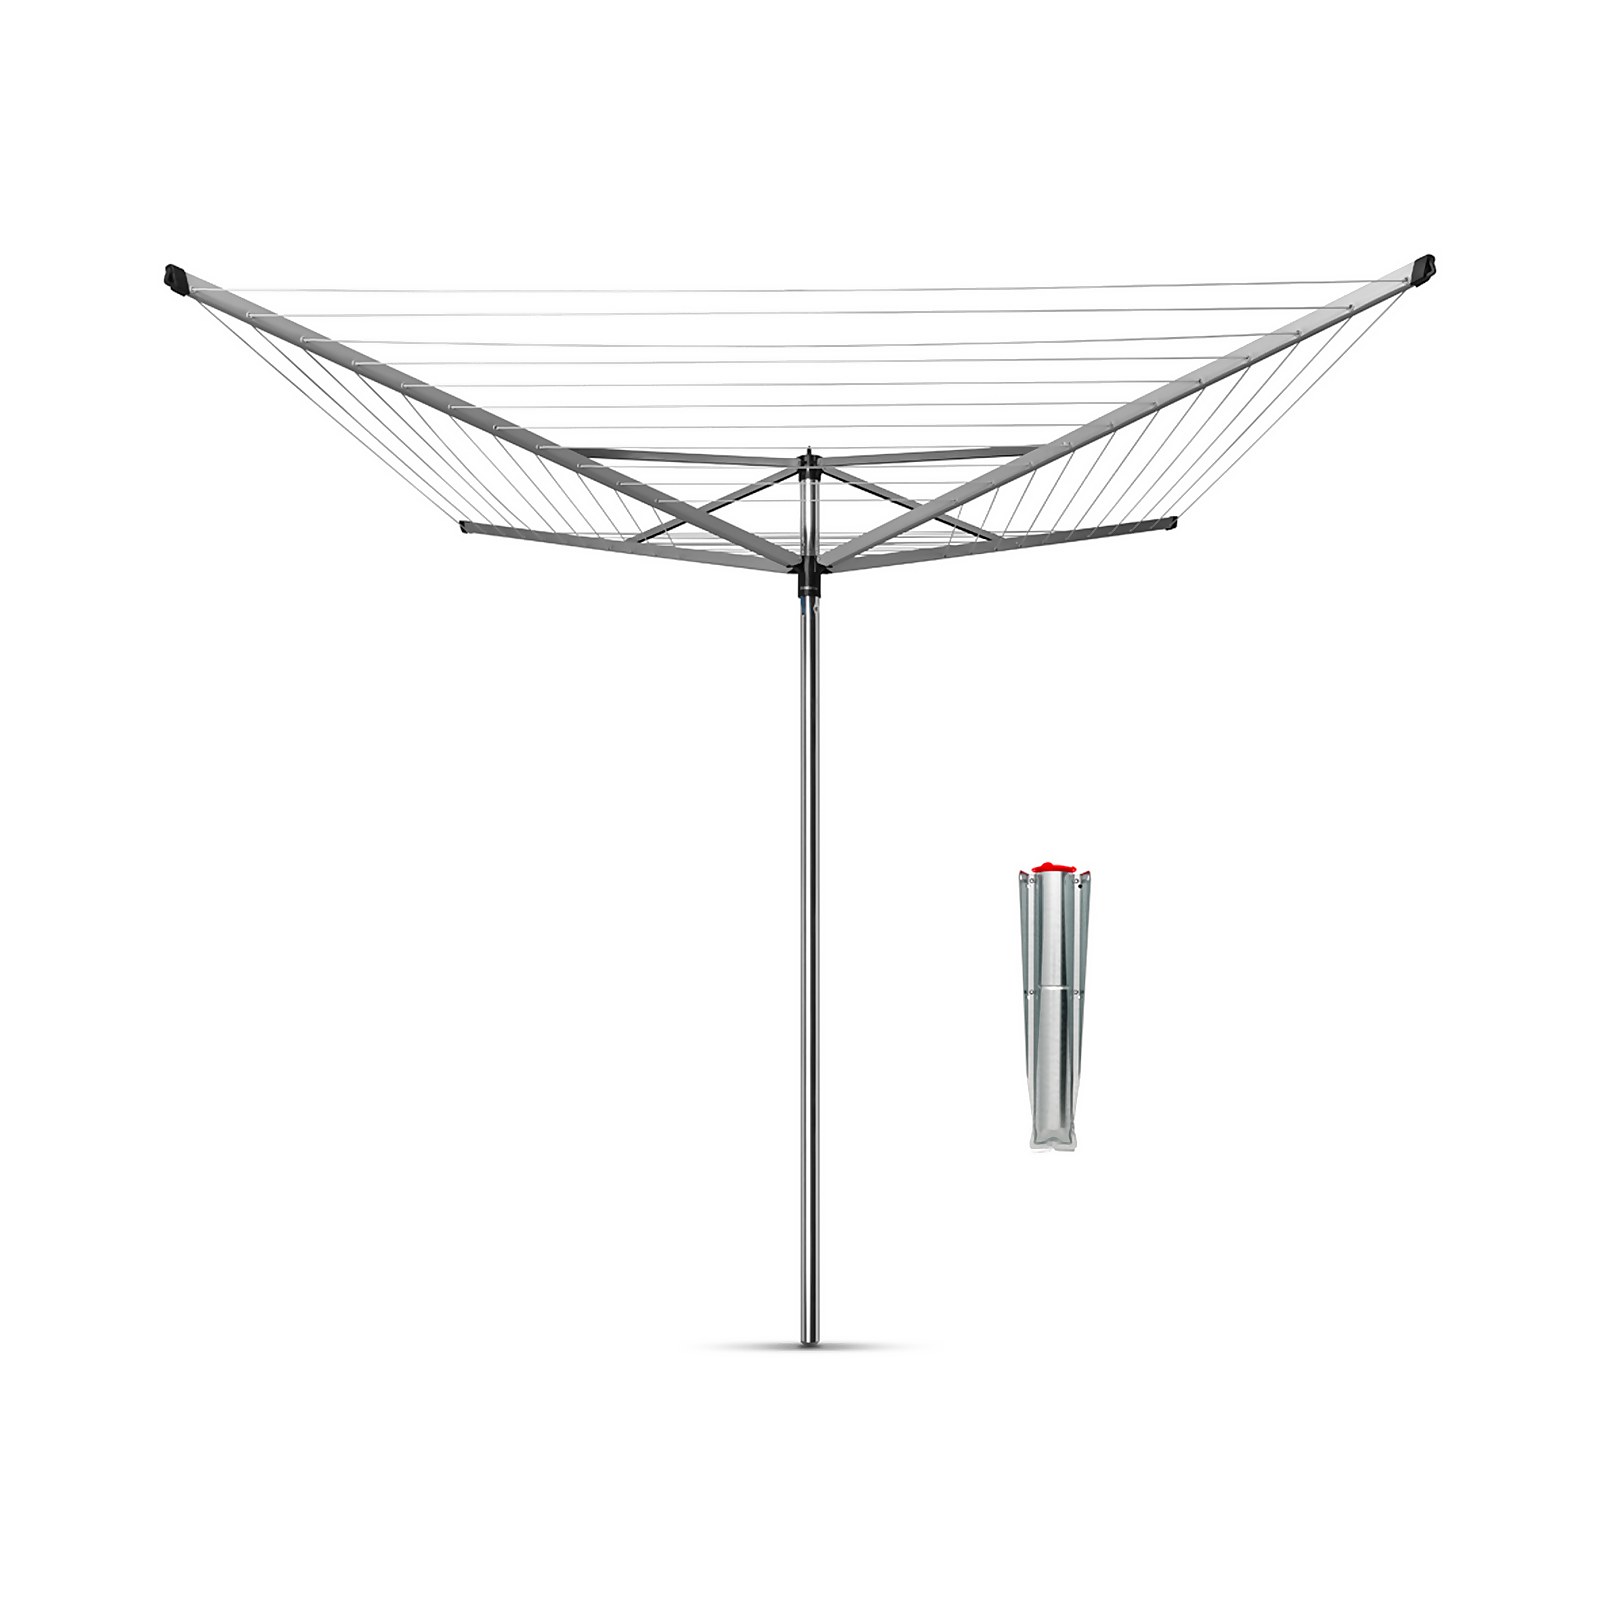 Topspinner 60m Rotary Dryer with Ground Spike - Metallic Grey